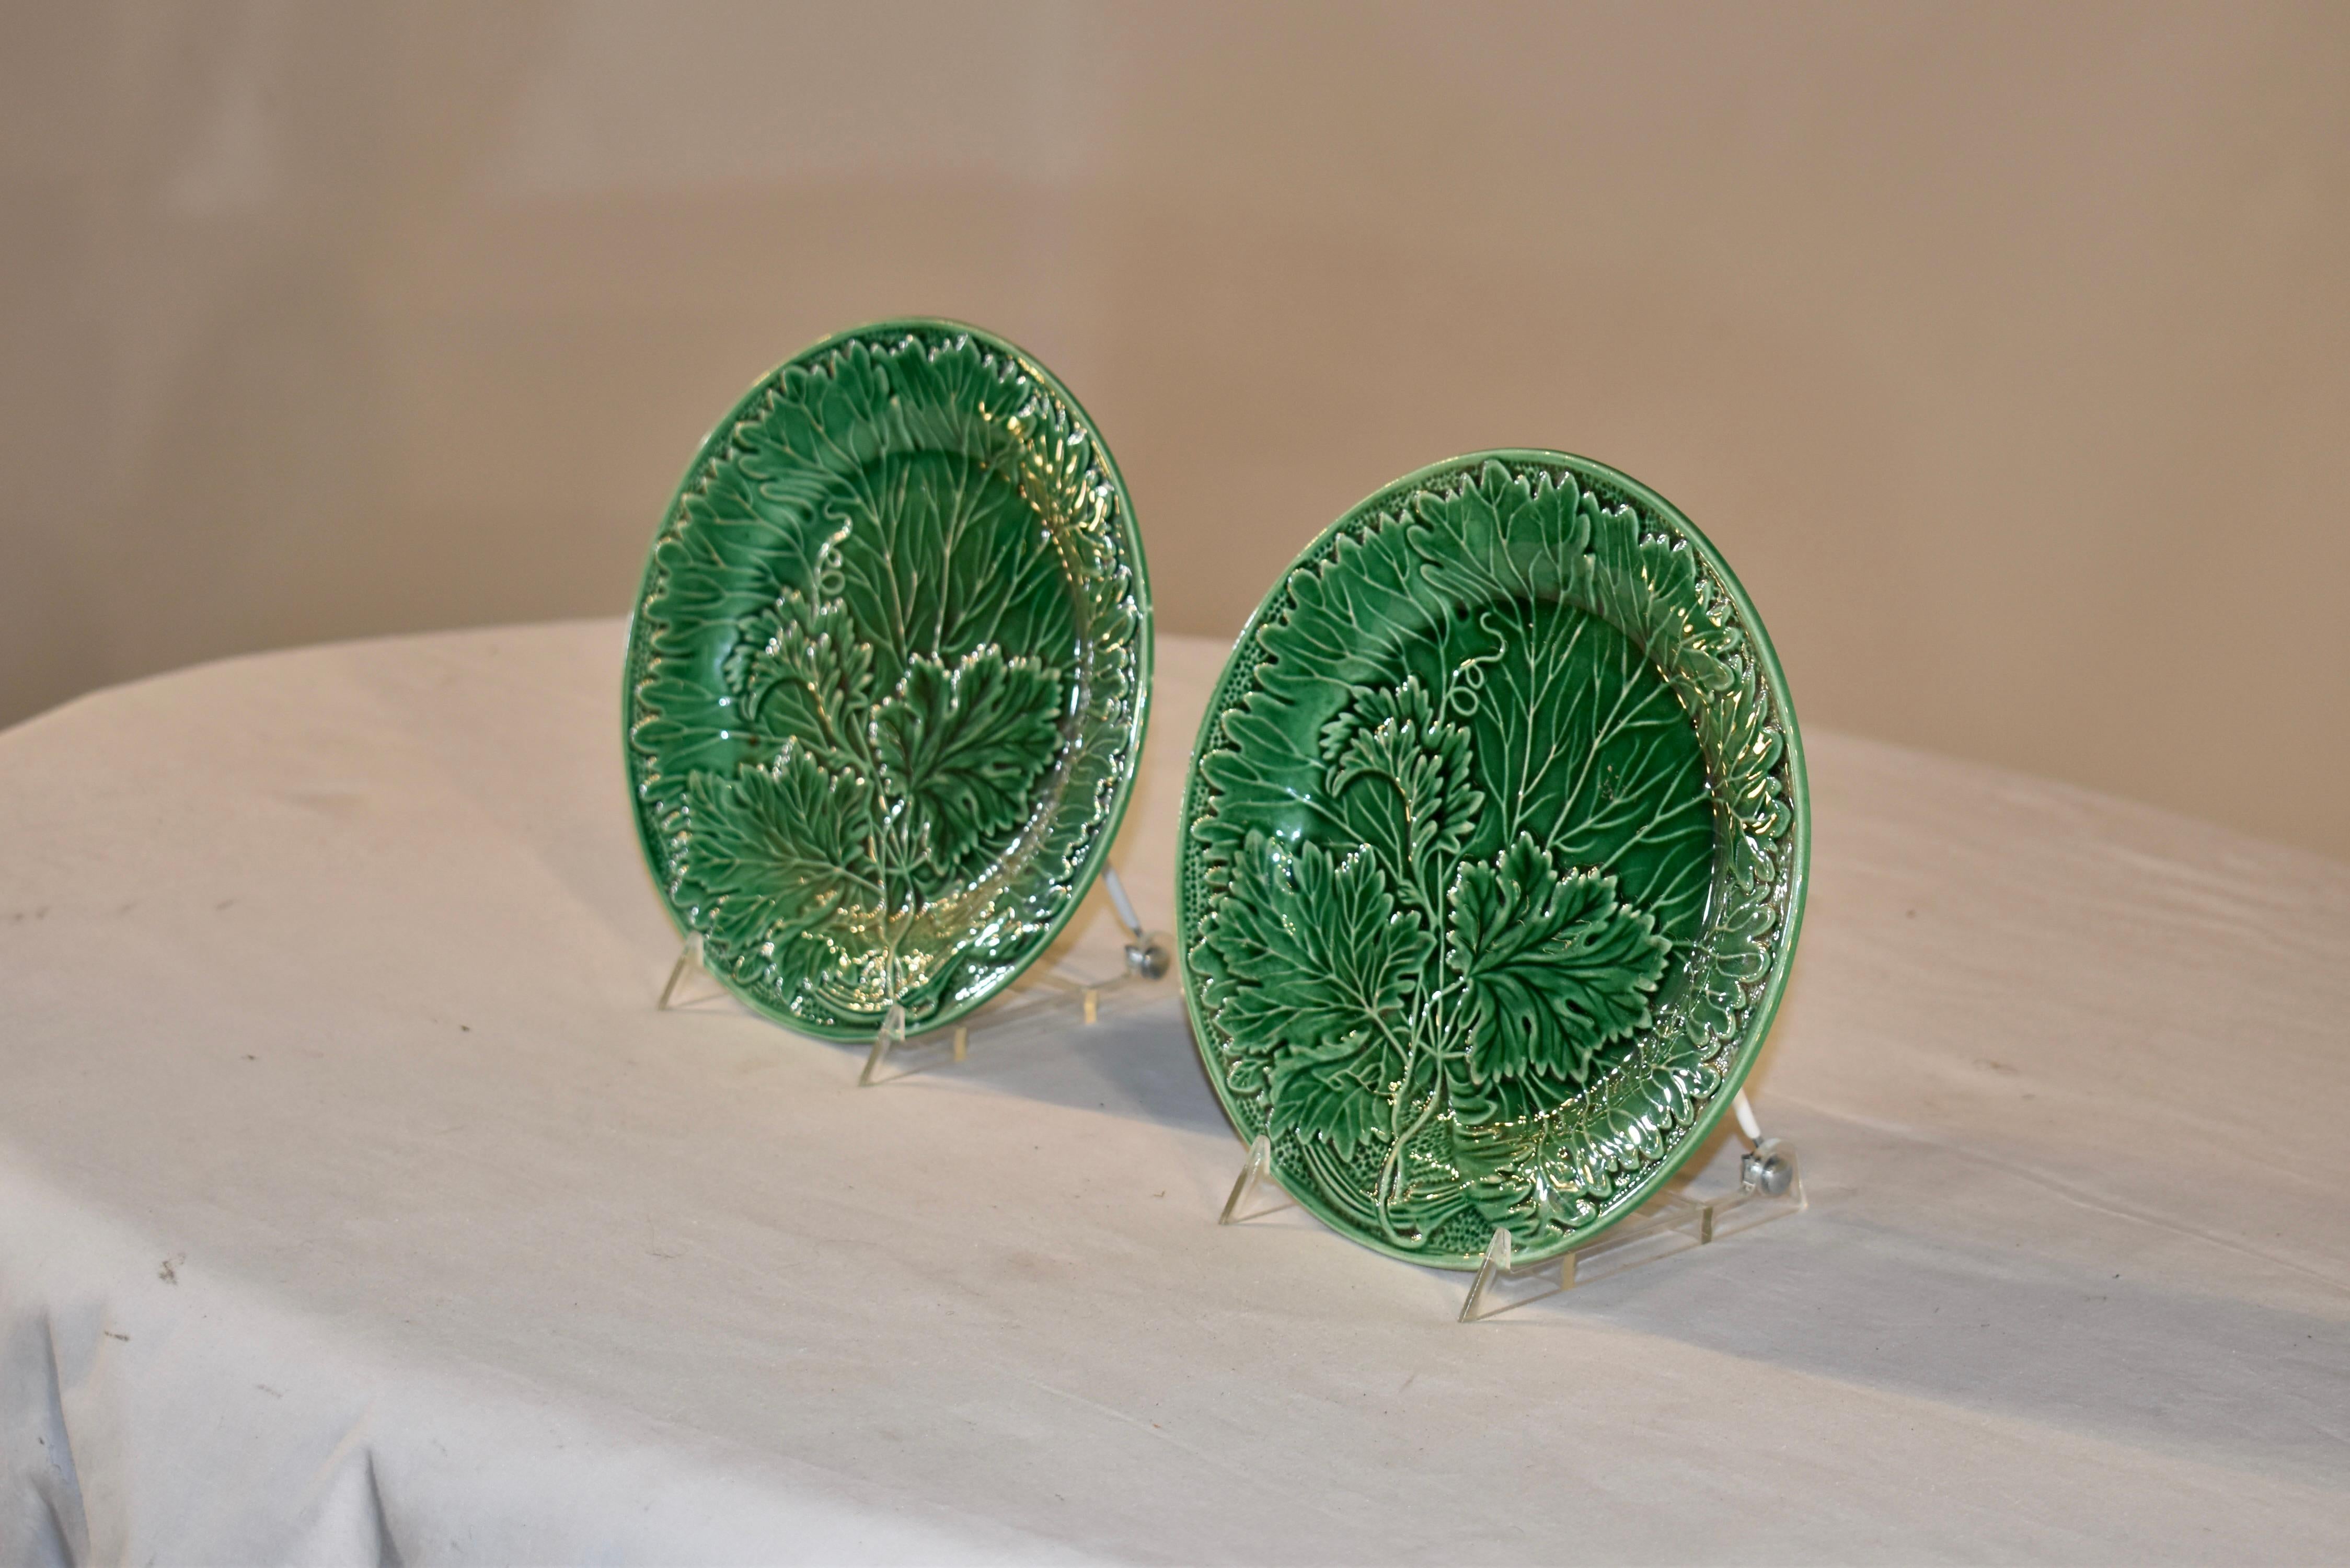 English Pair of 19th Century Majolica Plates from England For Sale